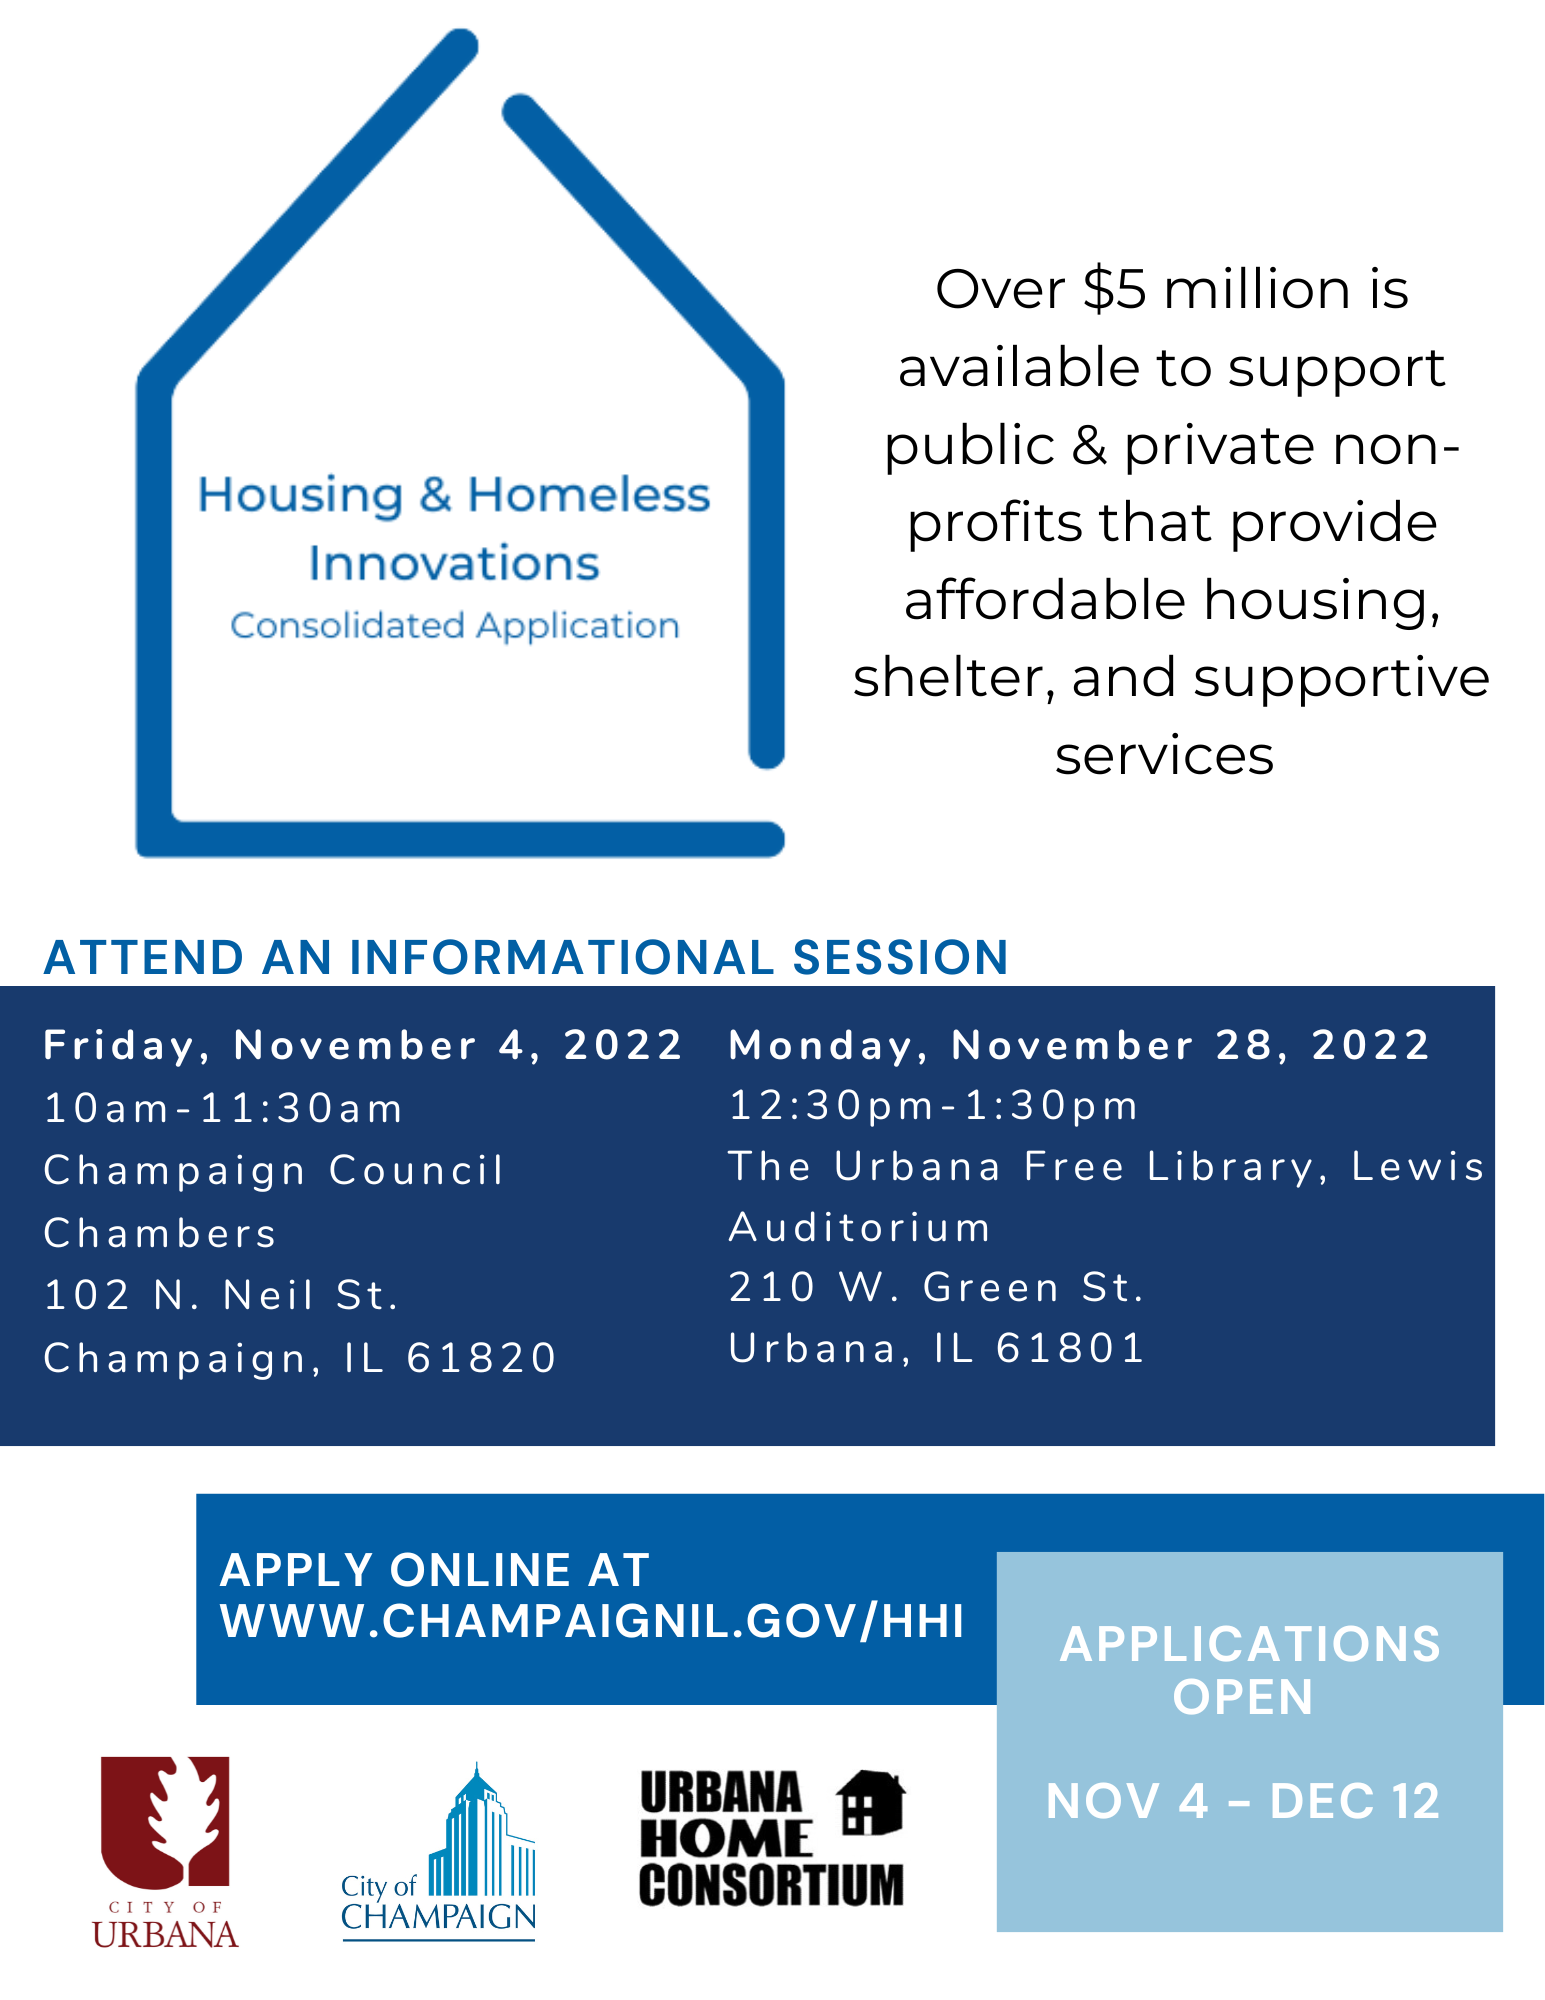 Housing & Homeless Innovations Consolidated Application Flier